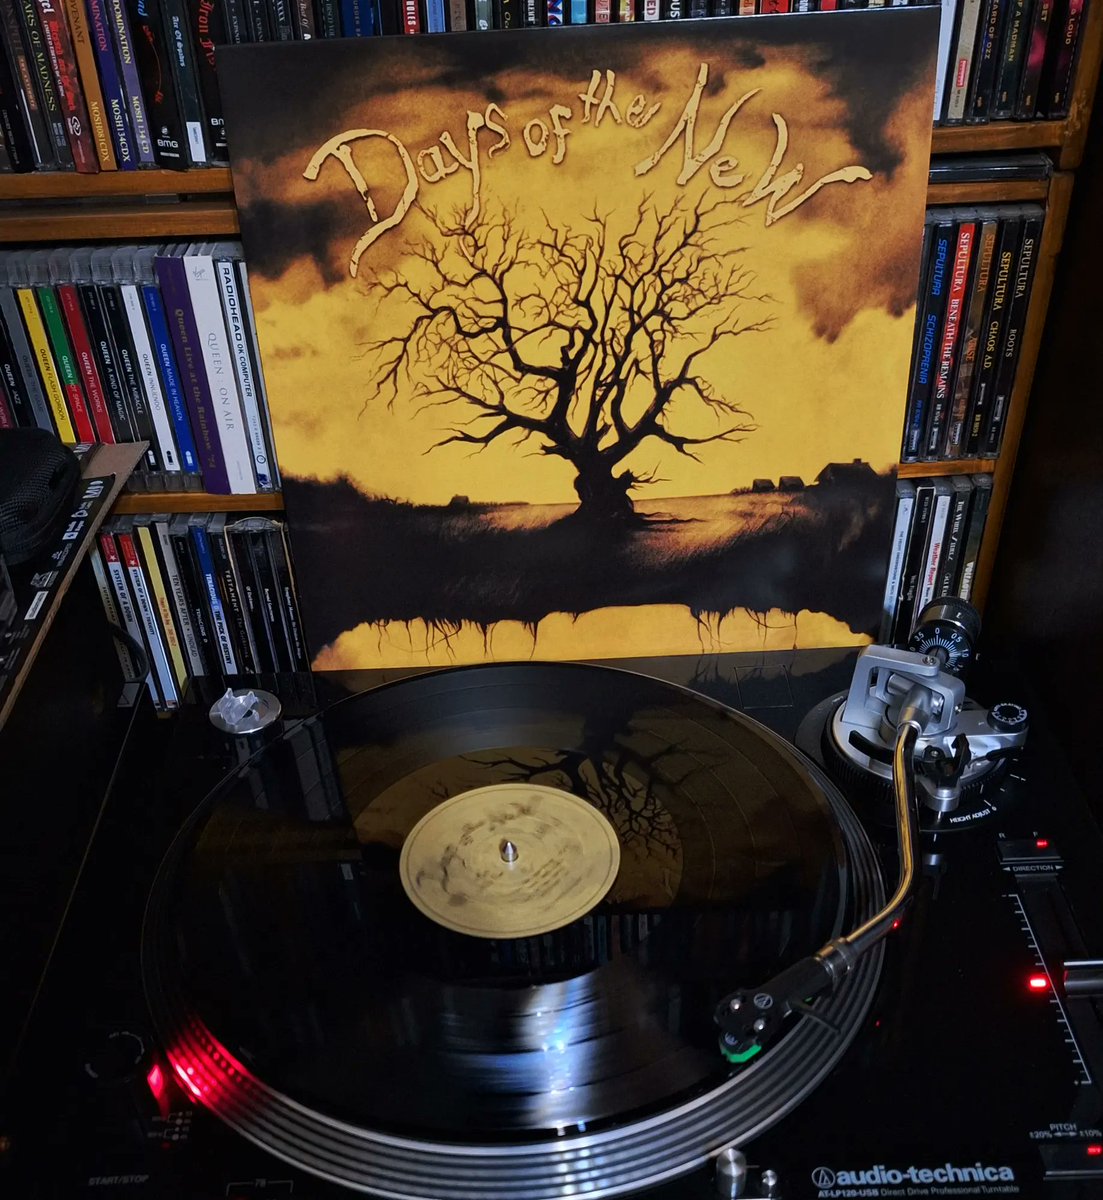 Touch, Peel and Stand #nowspinning #DaysOfTheNew #YellowAlbum #Vinyl #classicalbums #25thanniversary #myvinylcollection